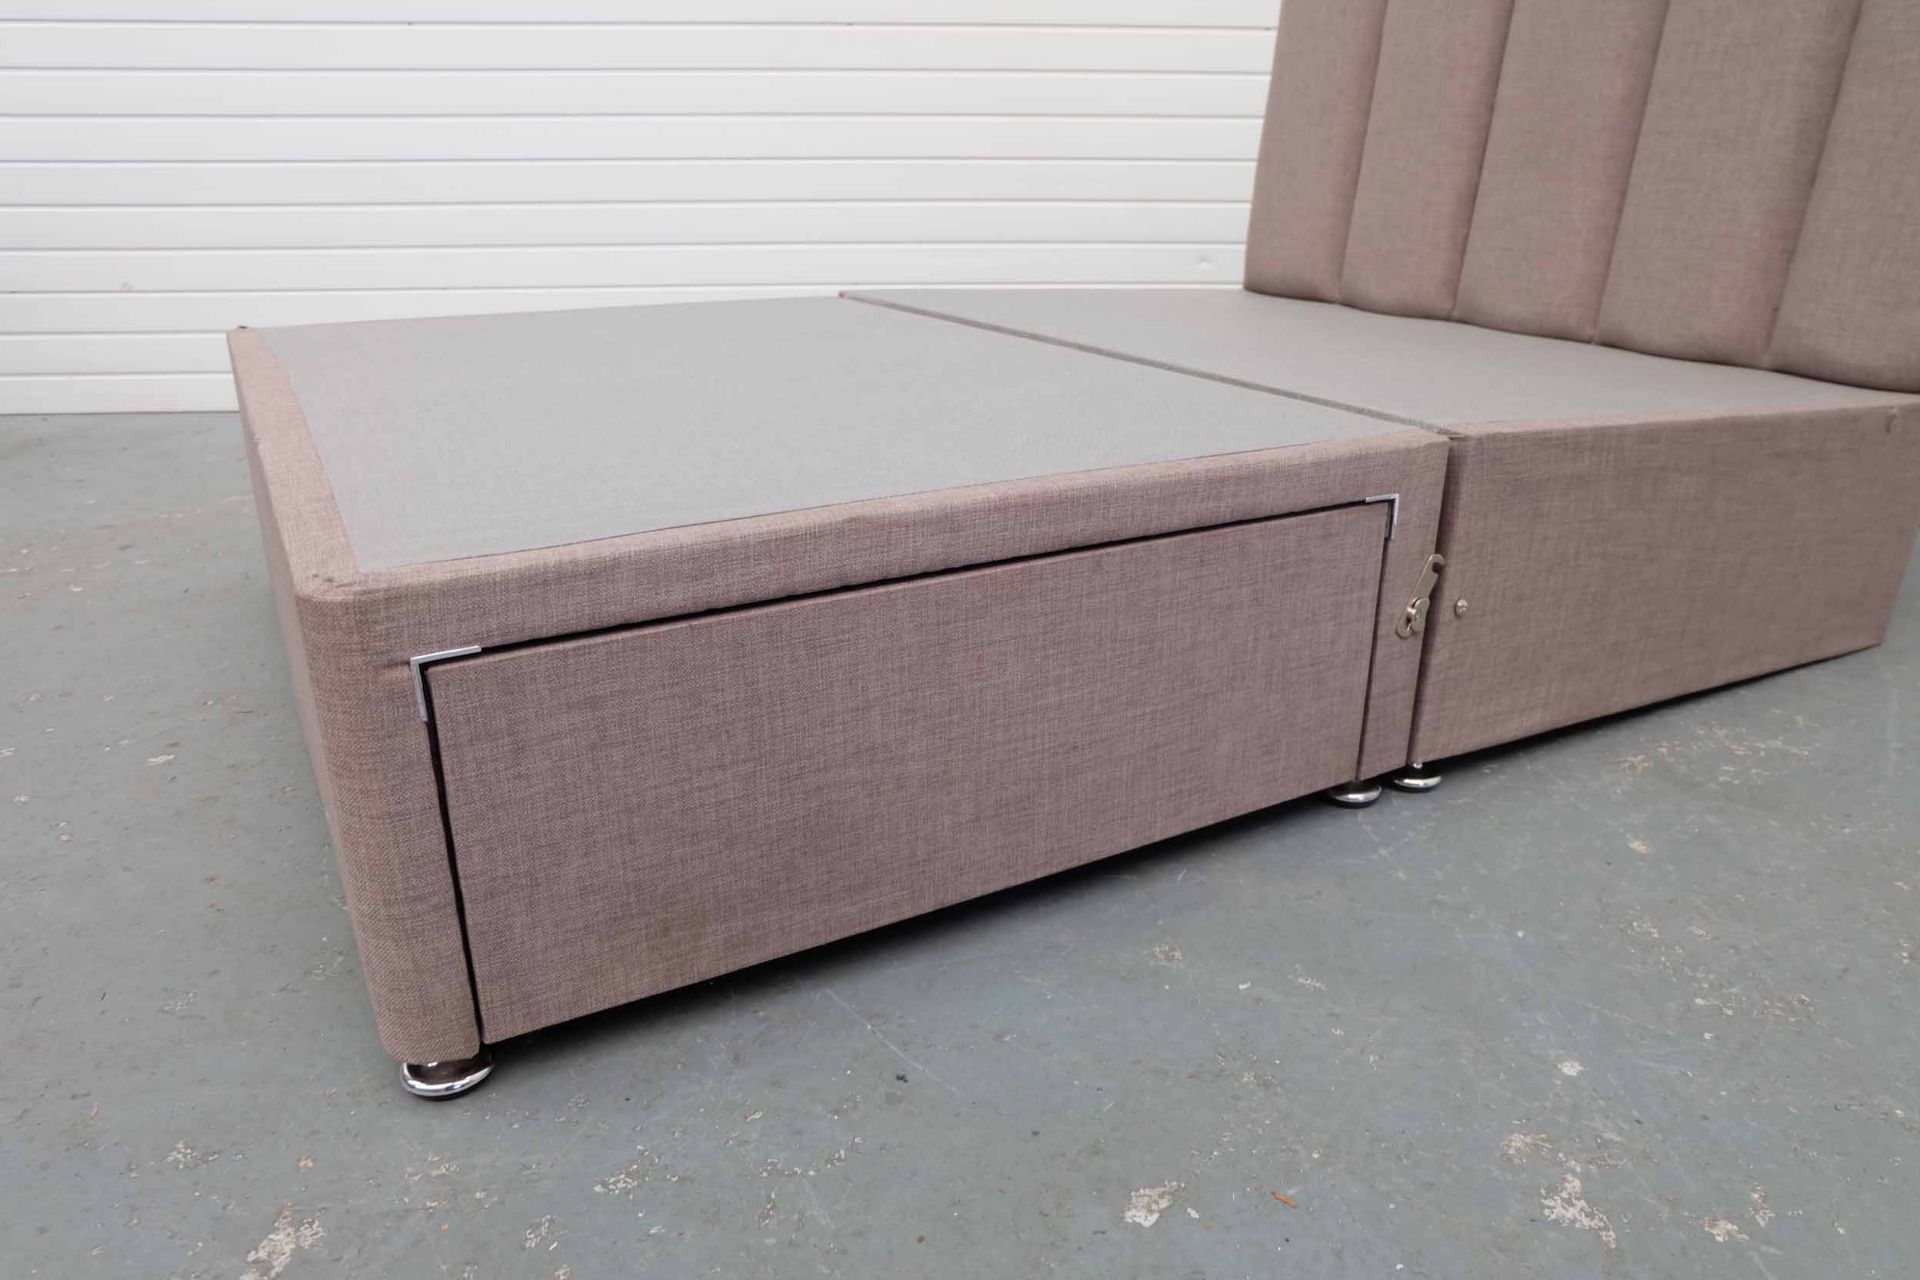 Upholstered Divan Style Bed Base & Headboard. With Storage Drawers. - Image 2 of 4